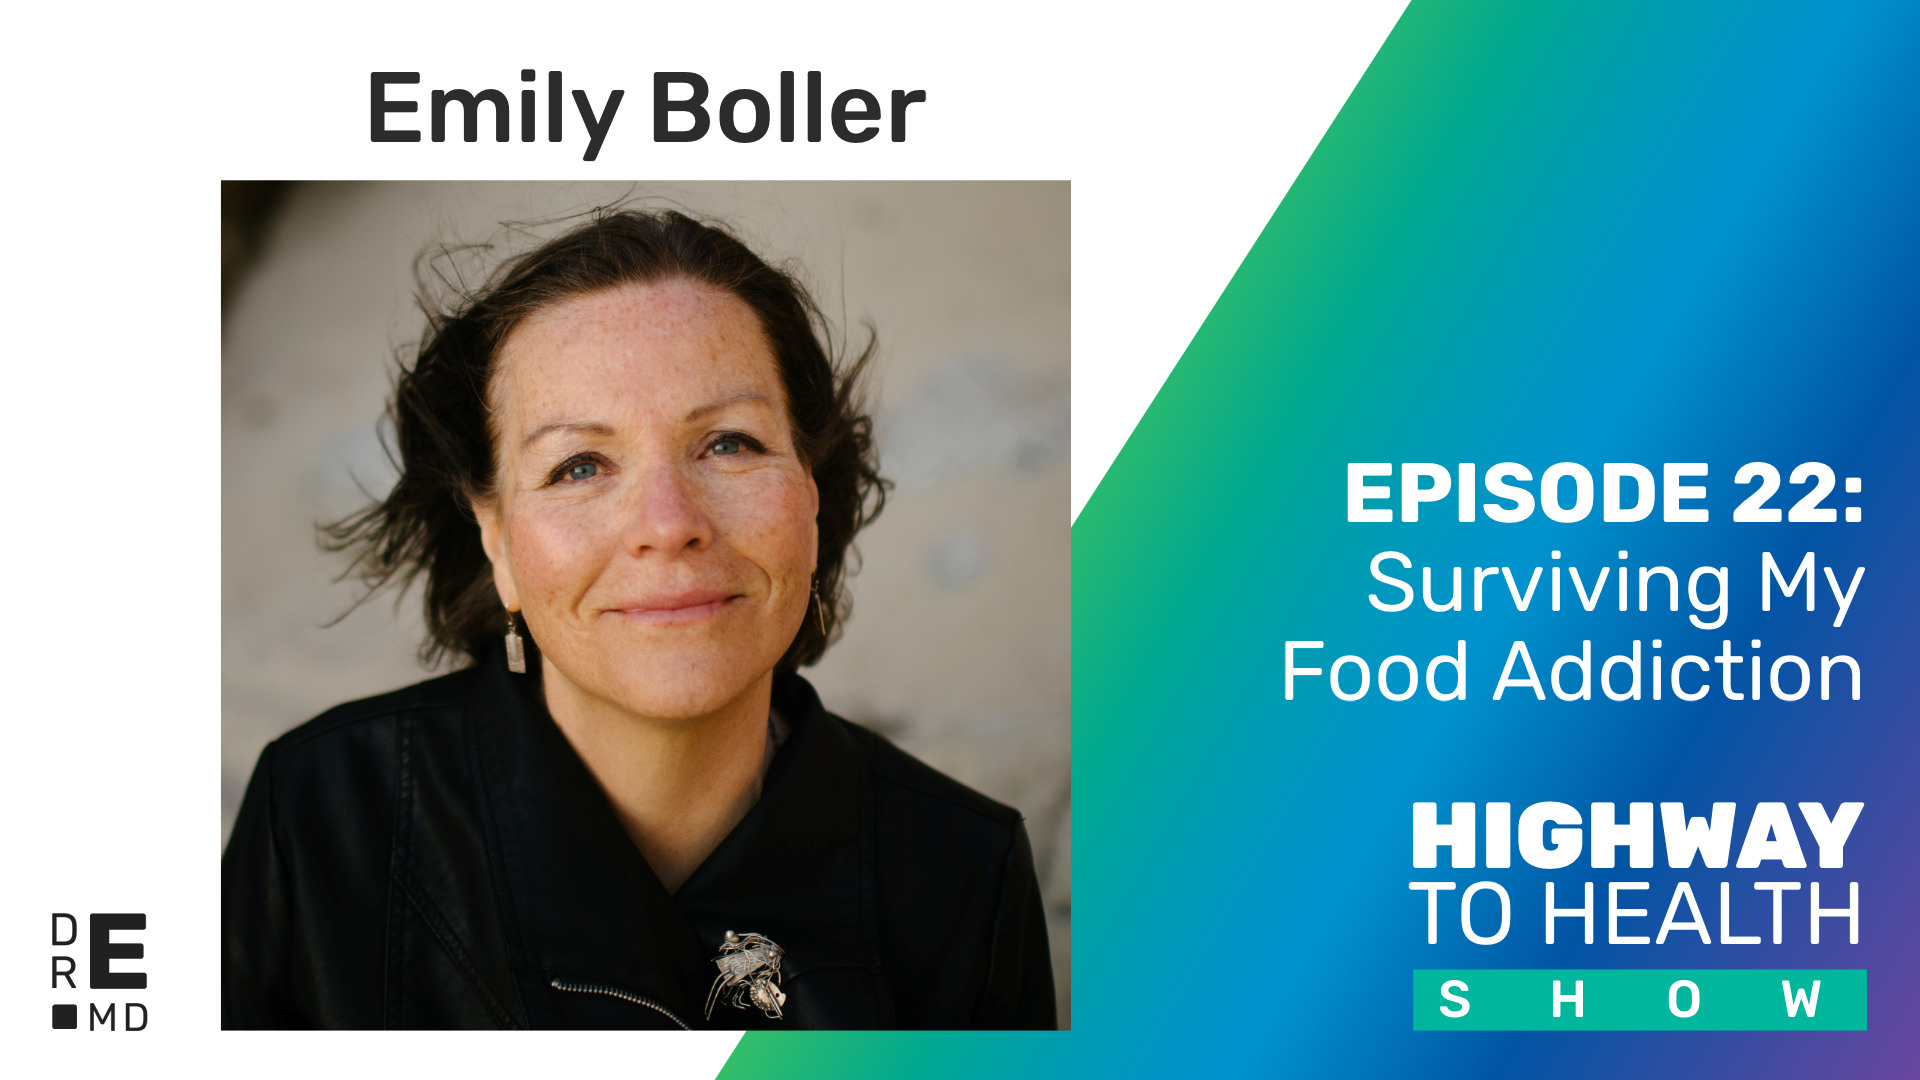 Highway to Health: Ep 22 - Emily Boller